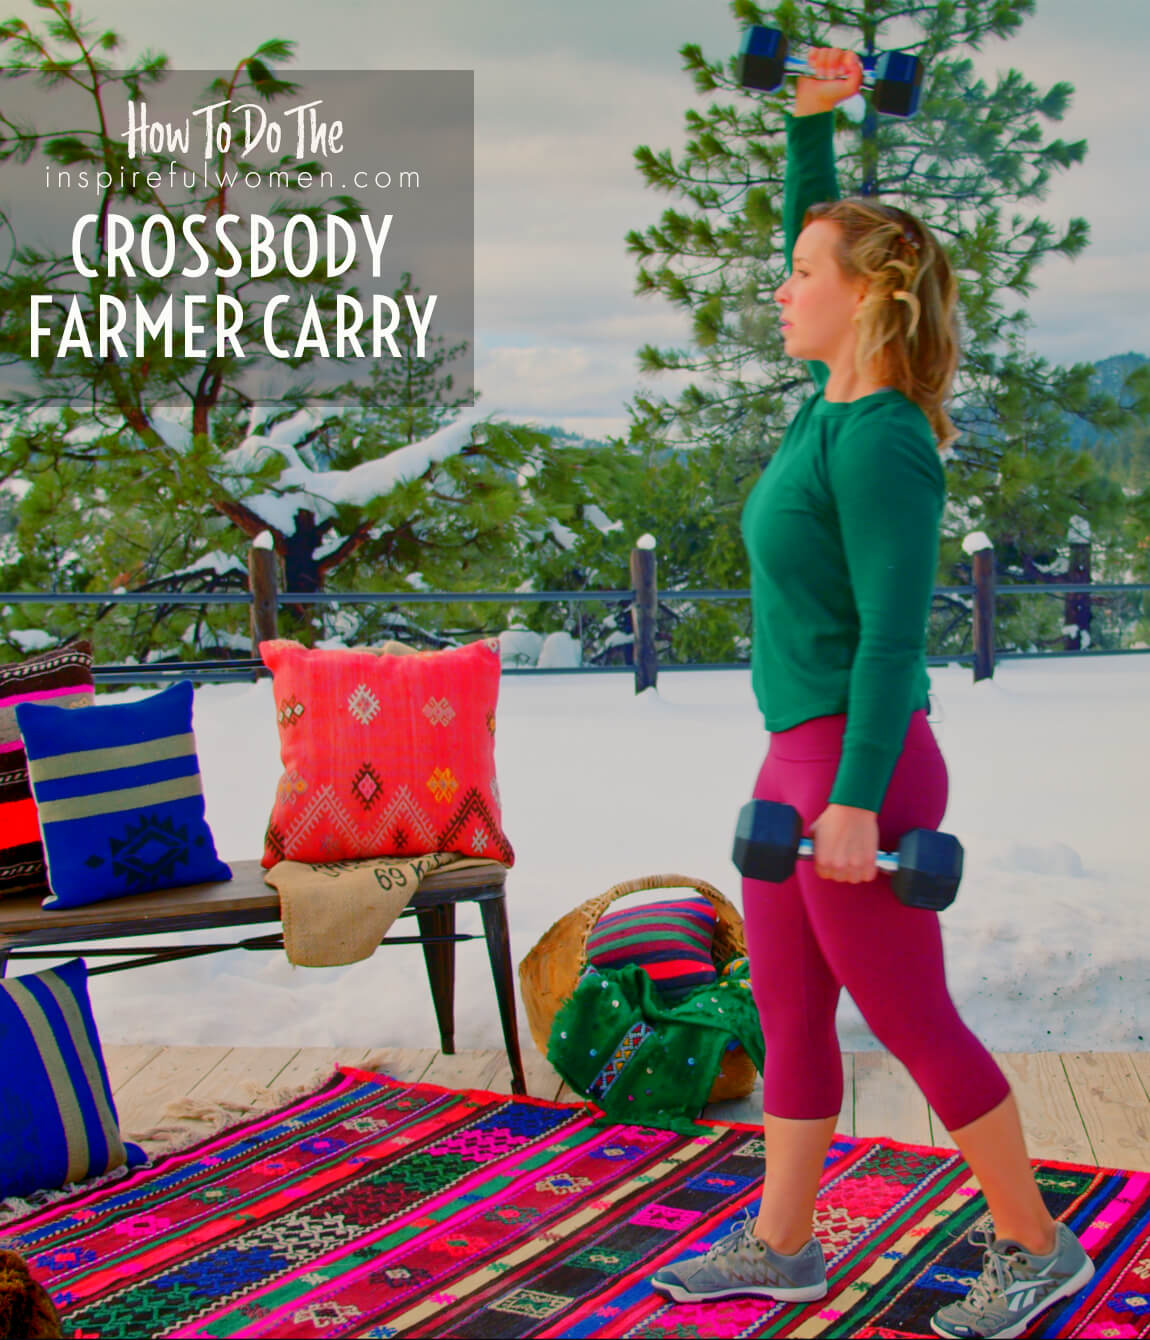 how-to-crossbody-farmer-carry-dumbbells-total-body-core-exercise-proper-form-side